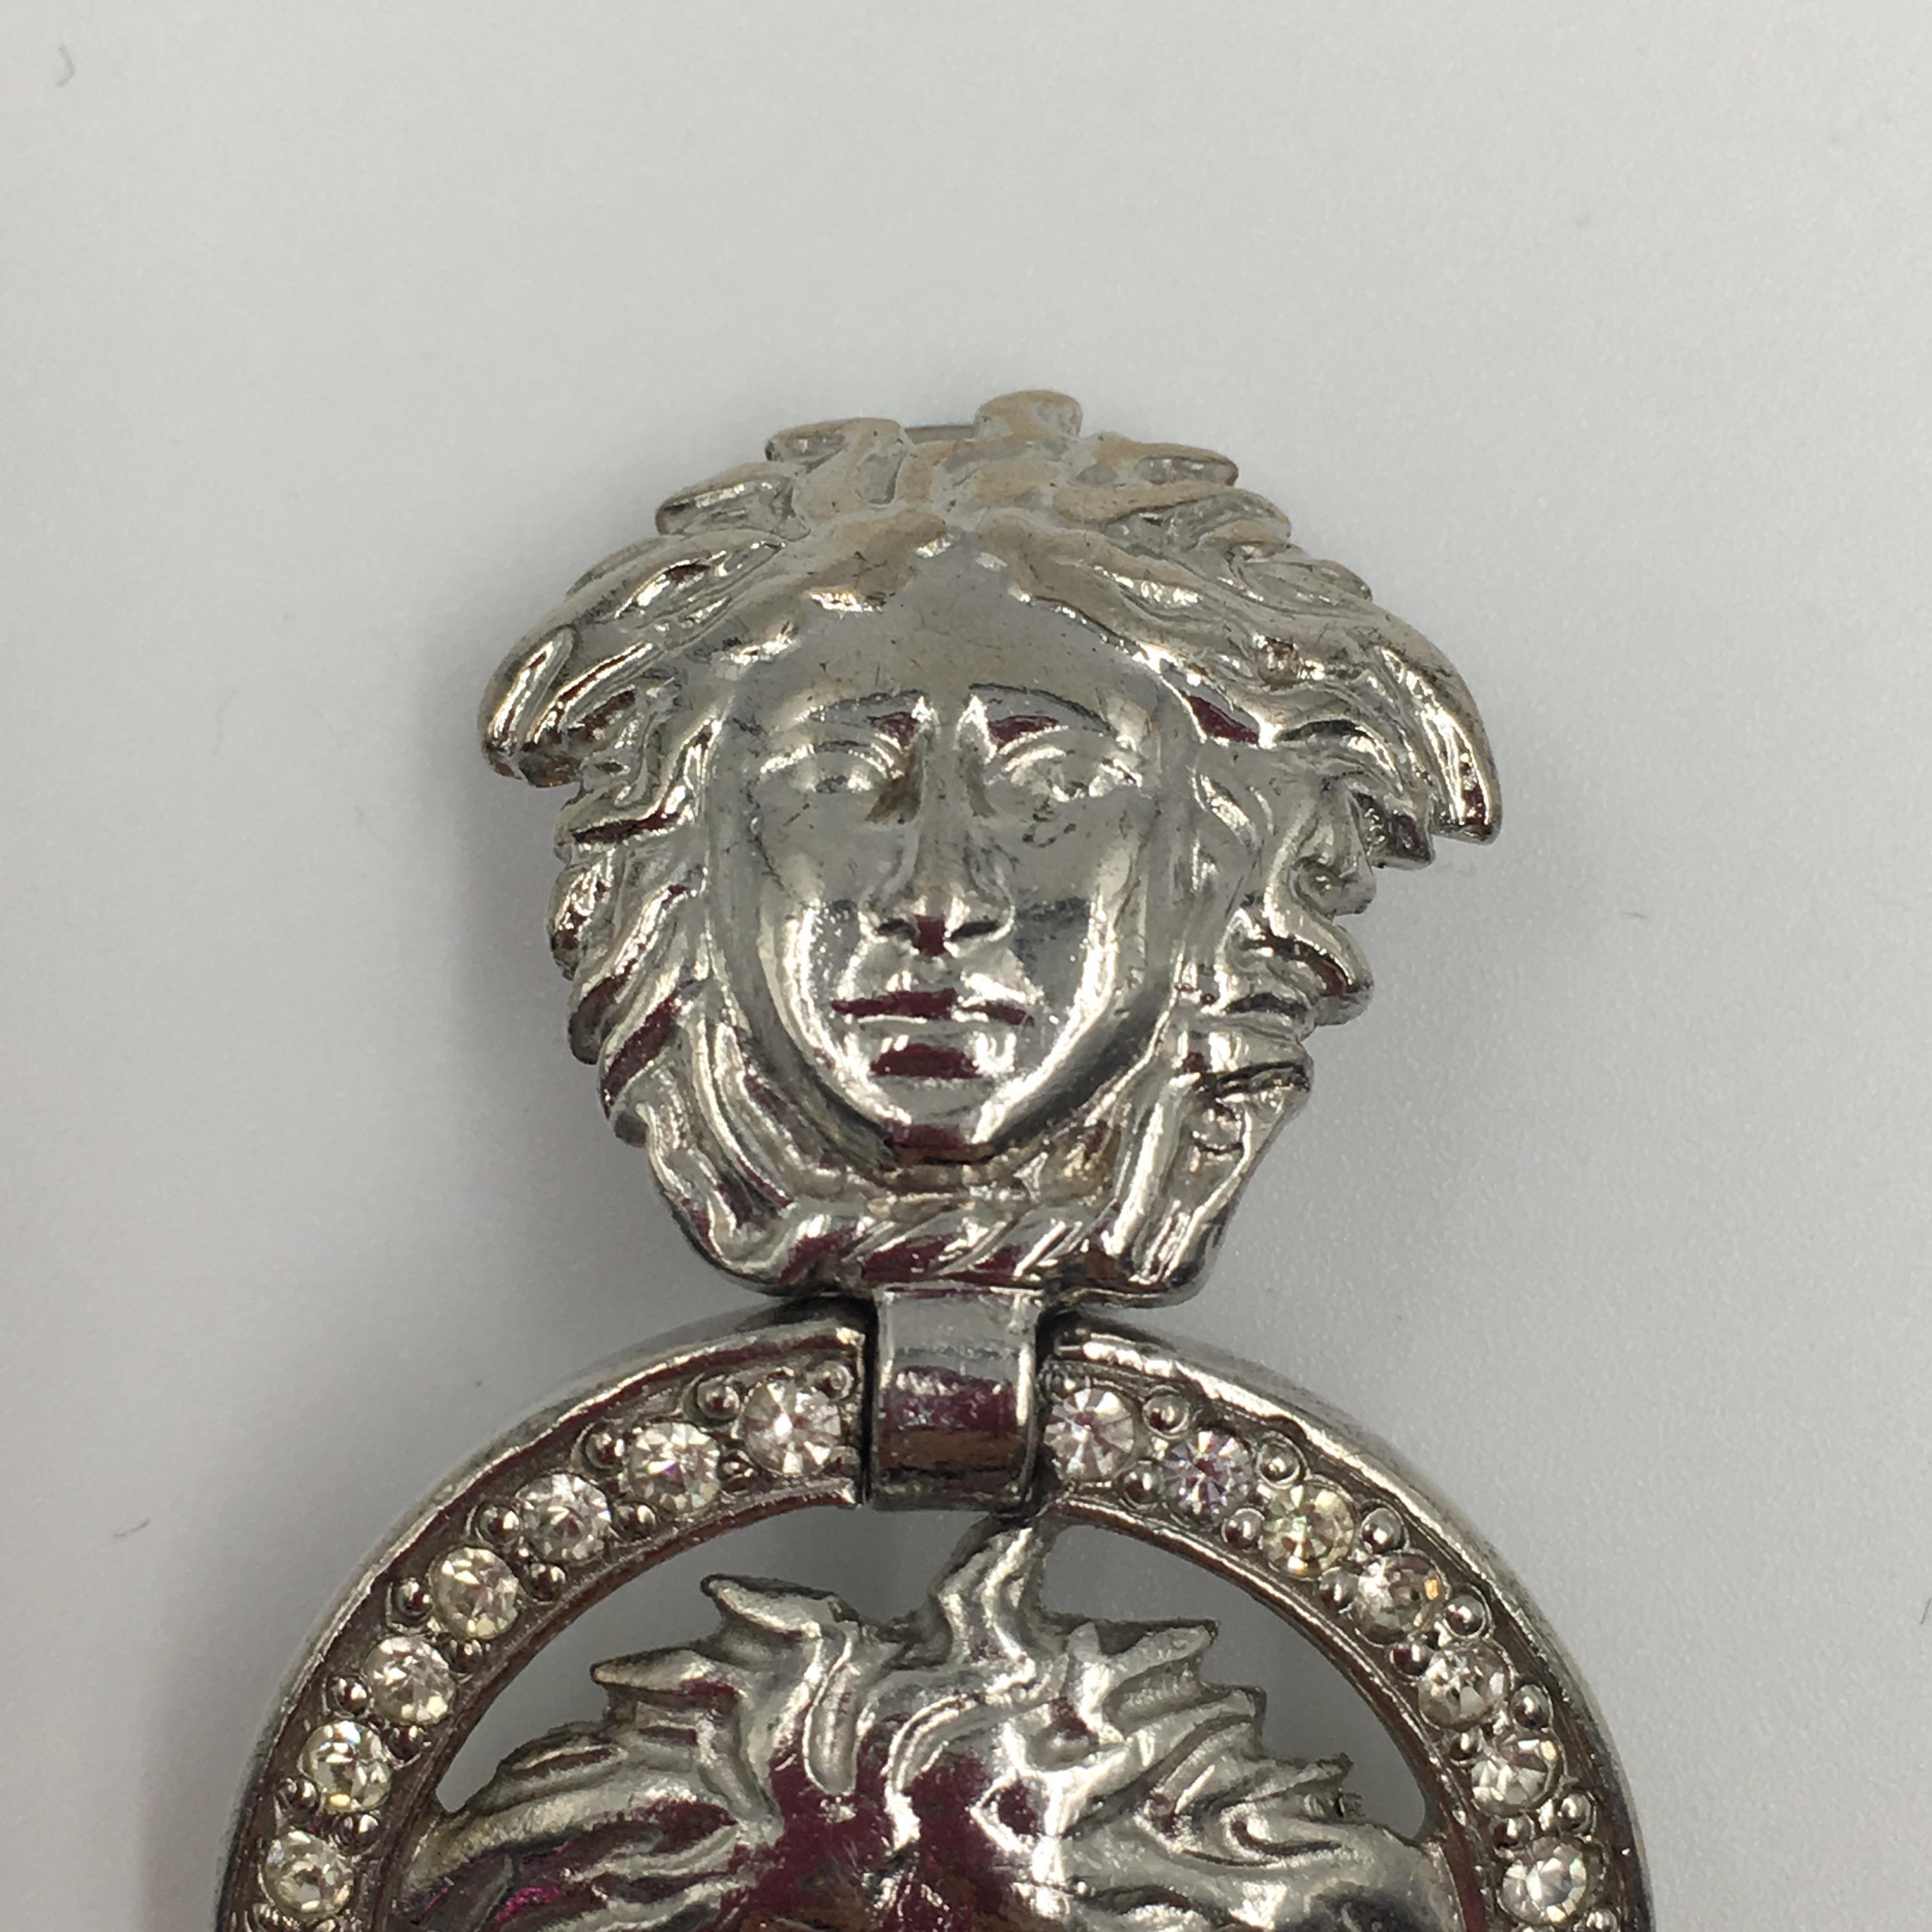 Gianni Versace Silver Tone Medusa Clip On Drop Earrings. Medusa head clip on with Medusa head surrounded by a circle of rhinestones. Gianni Versace stamped on backside of each earring. 

Good vintage condition. 

Measurements are as follows:
Height